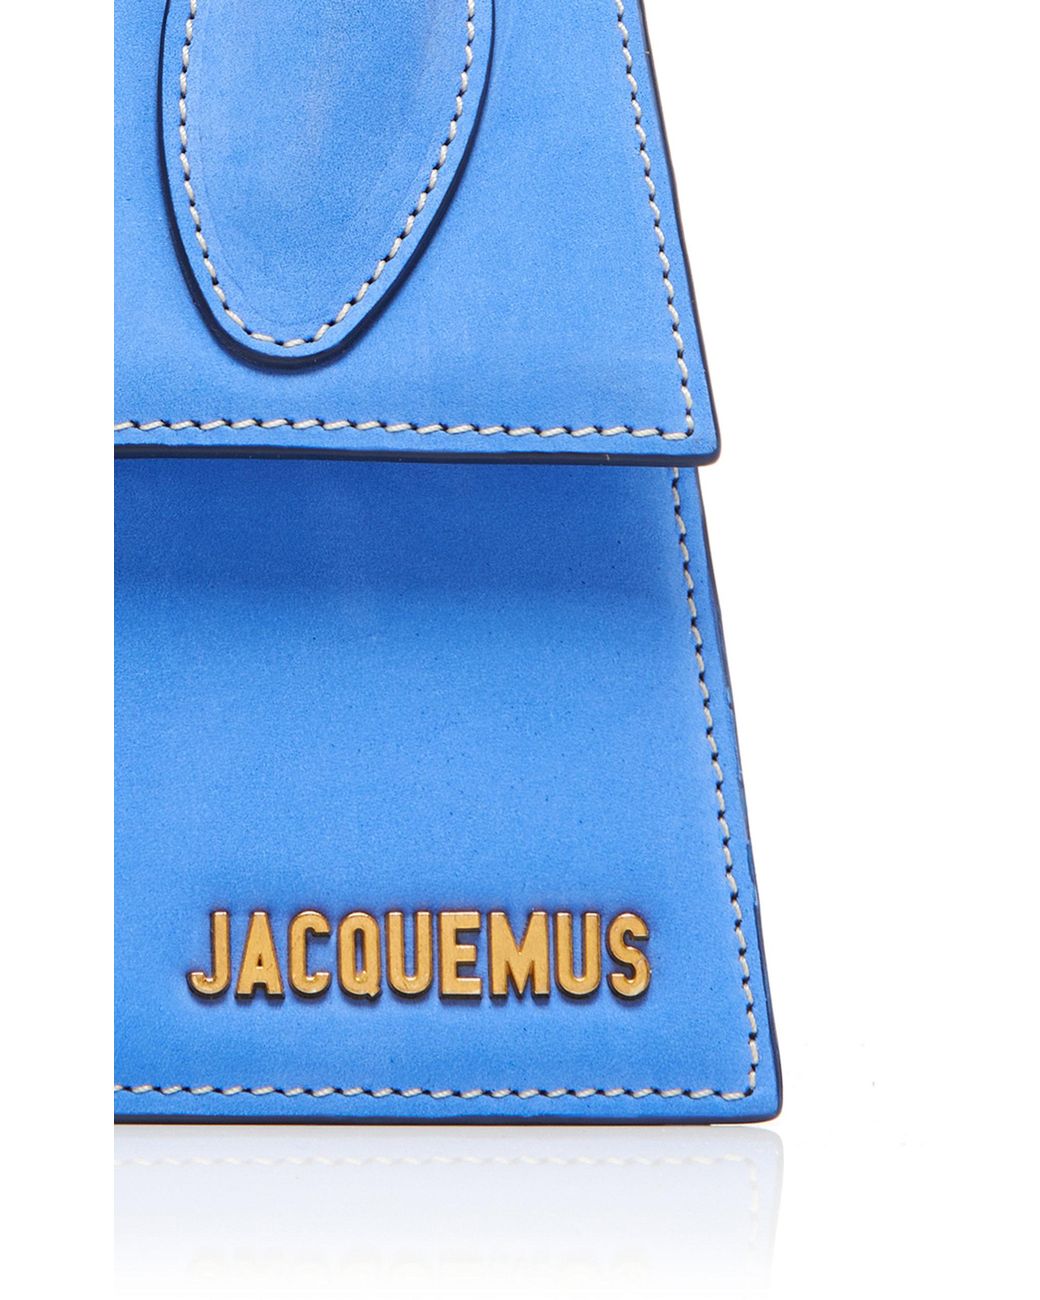 Le chiquito noeud leather handbag Jacquemus Blue in Leather - 34831653